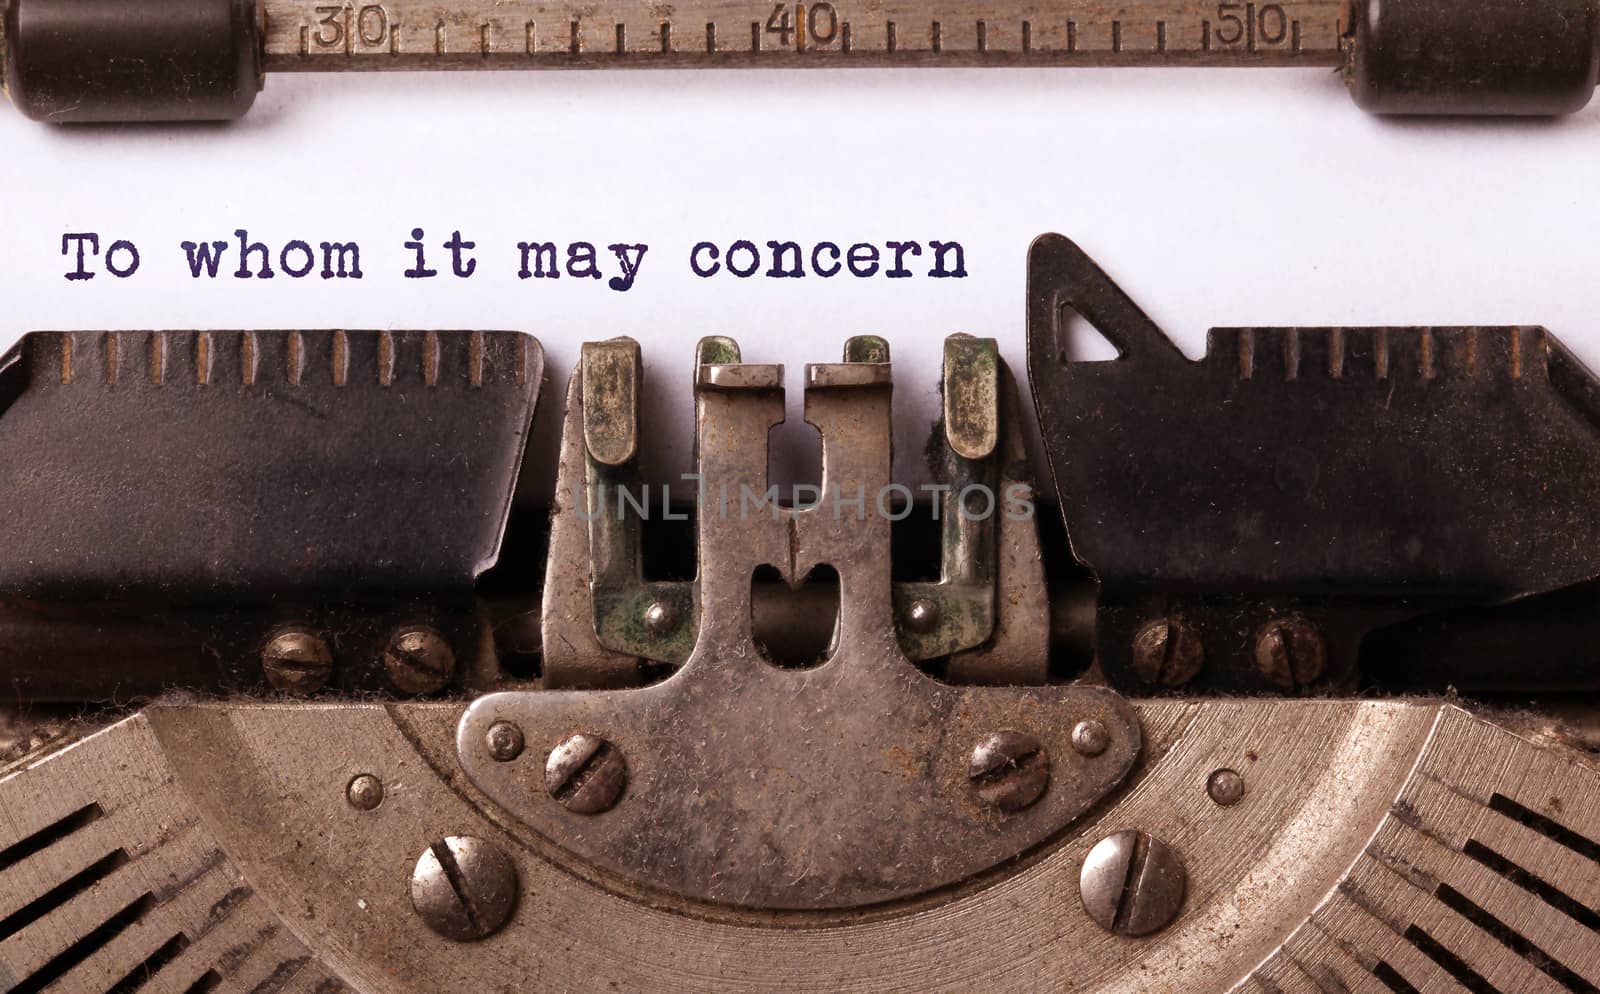 Vintage inscription made by old typewriter, to whom it may concern